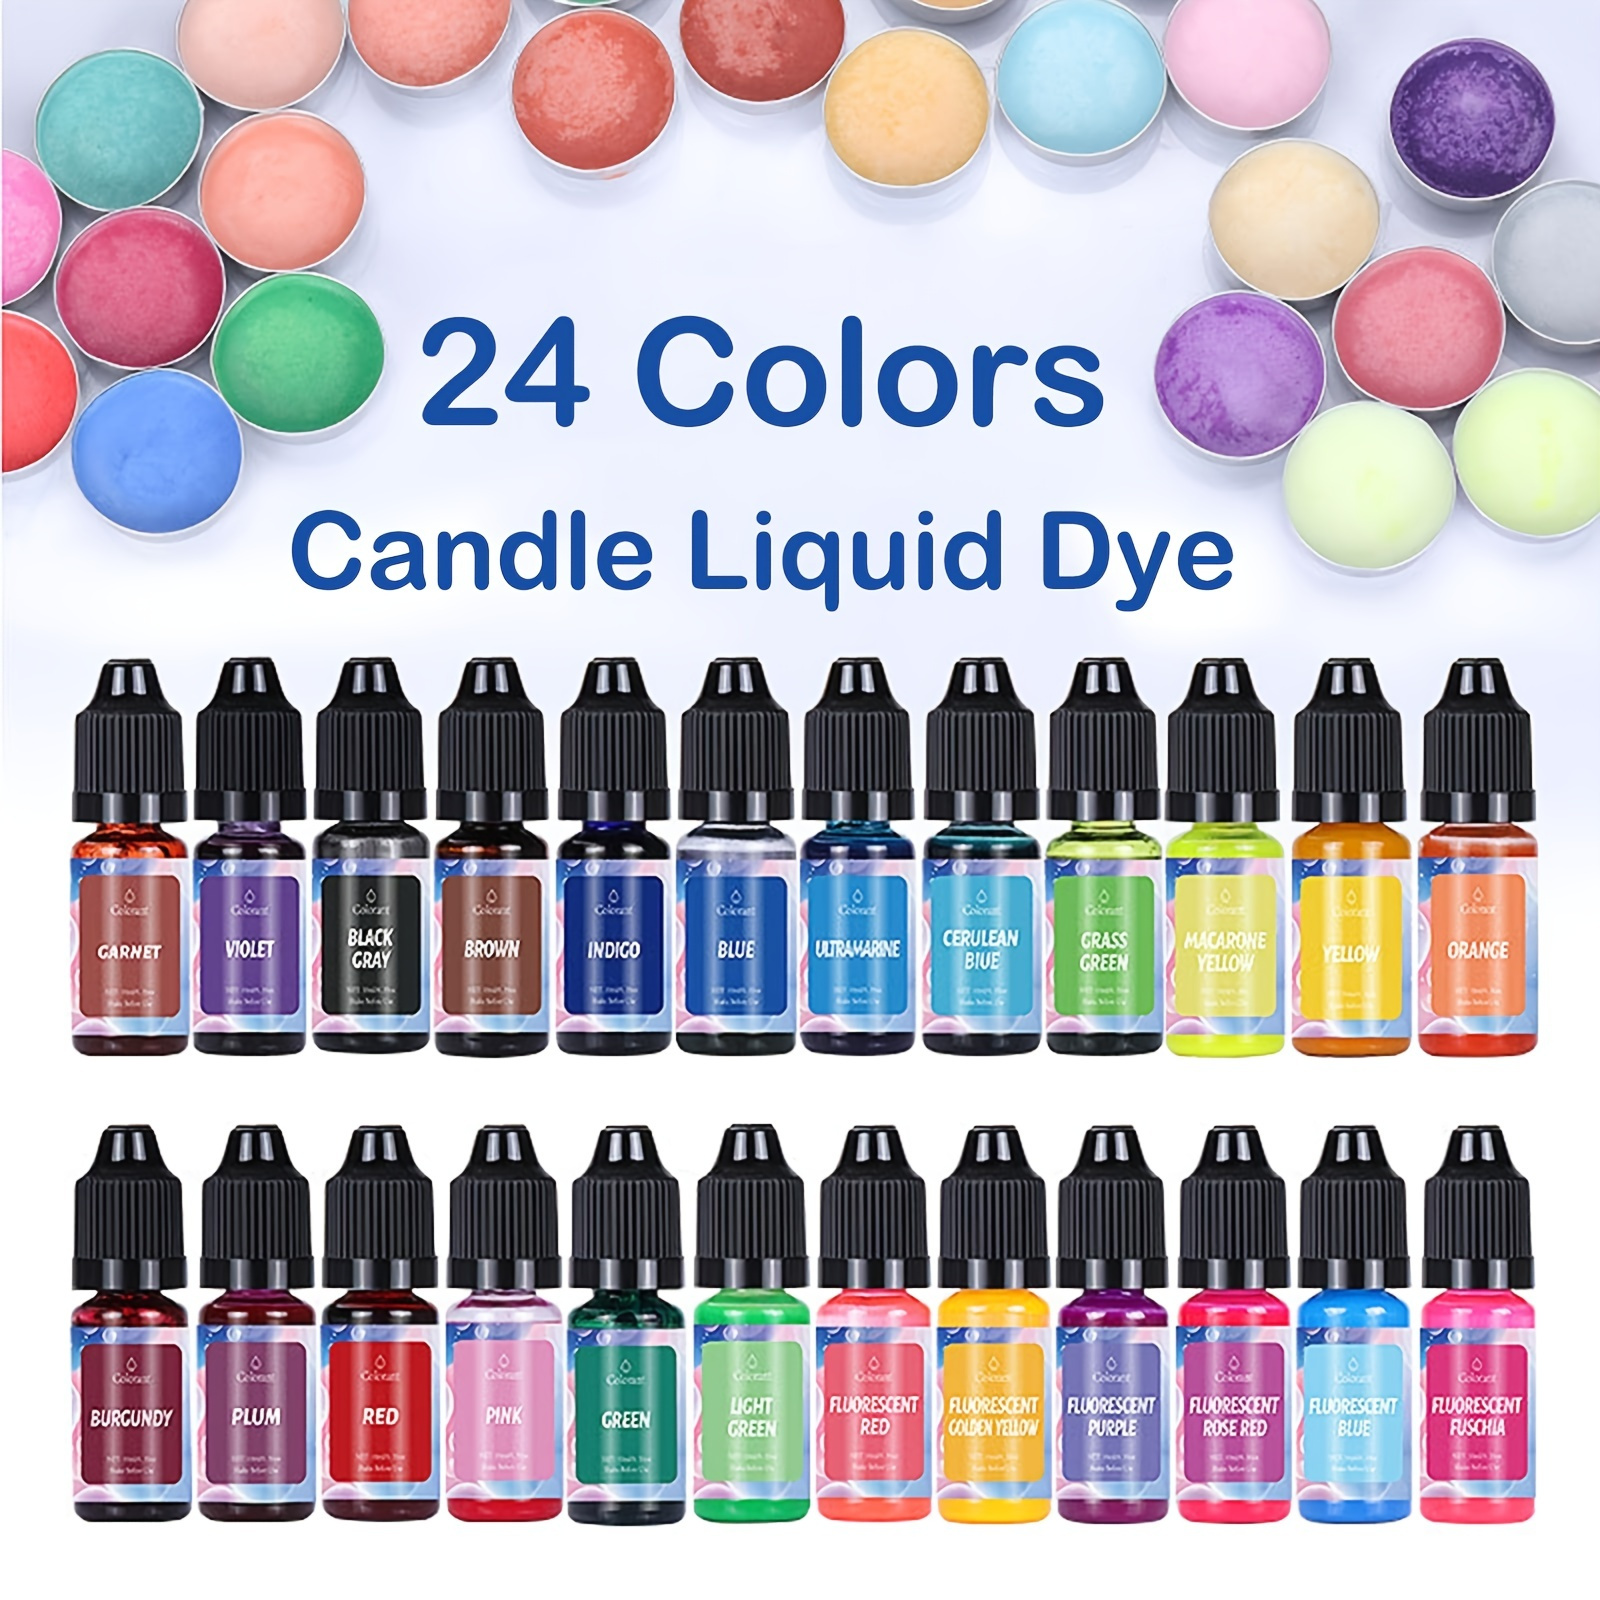 Candle dye - 18 Colors Liquid Oil-Based dye for Candle Wax, Vivid